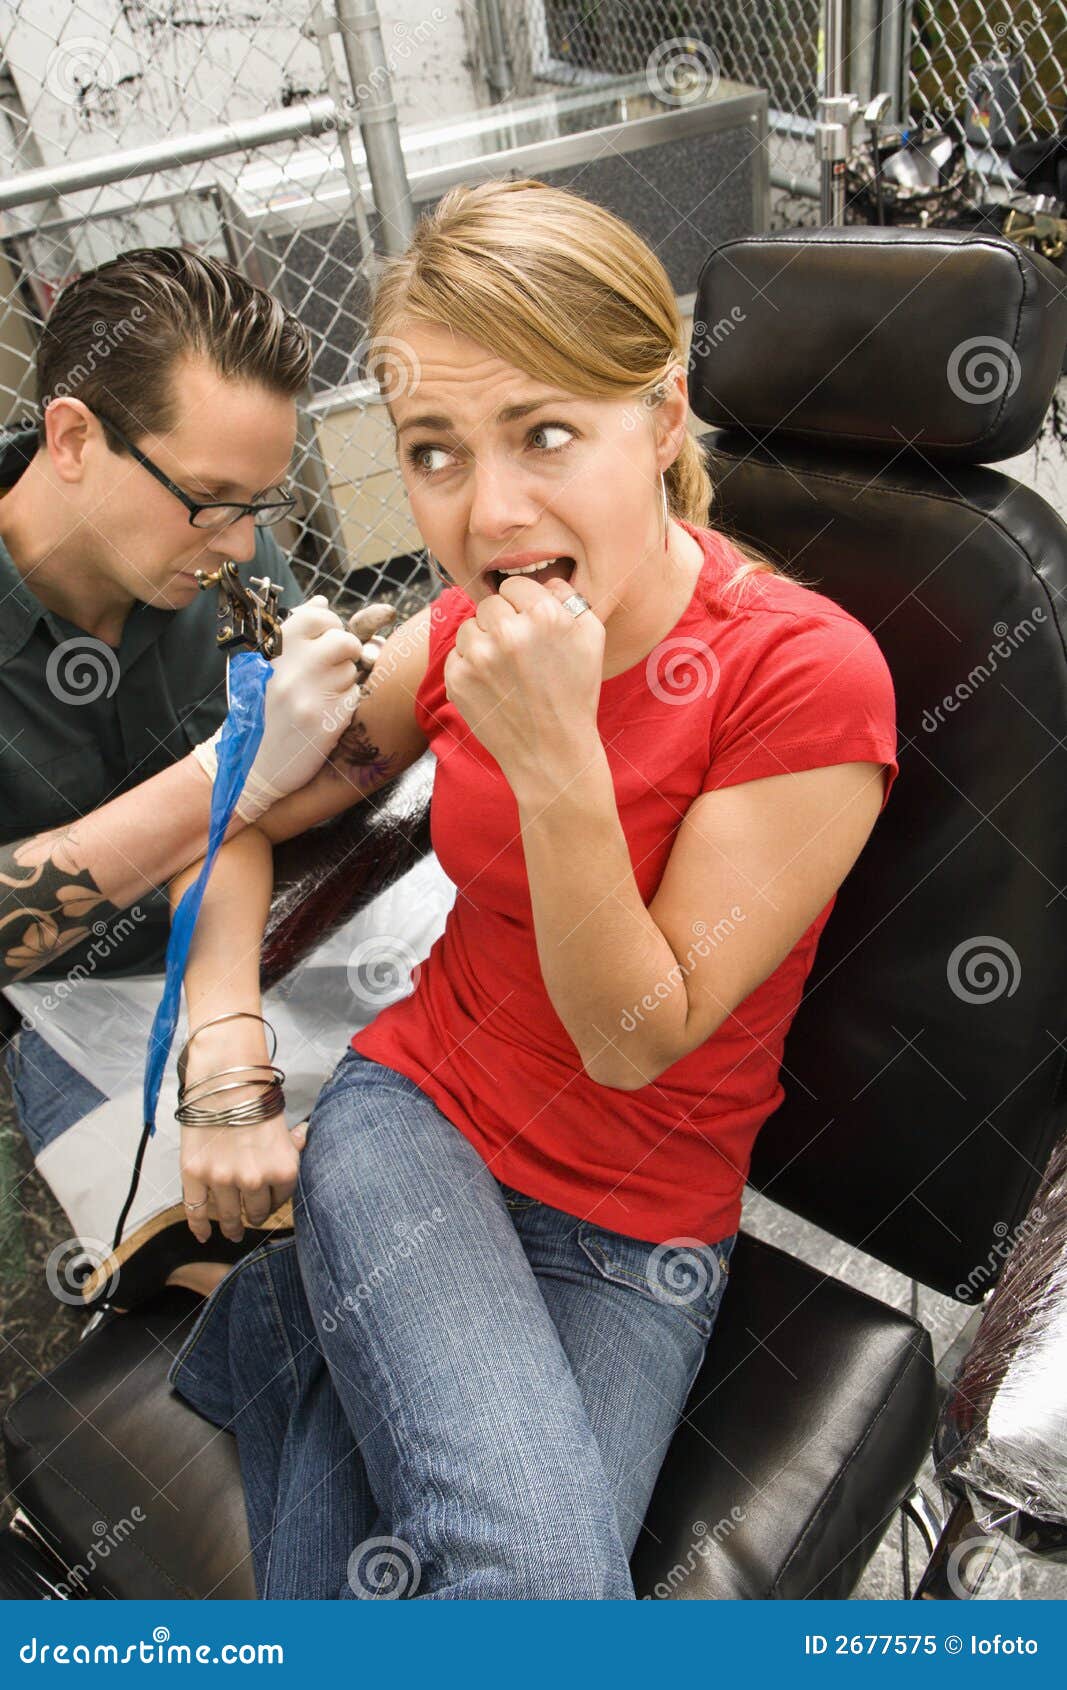 Woman Getting Tattoo. Royalty Free Stock Photo - Image: 2677575